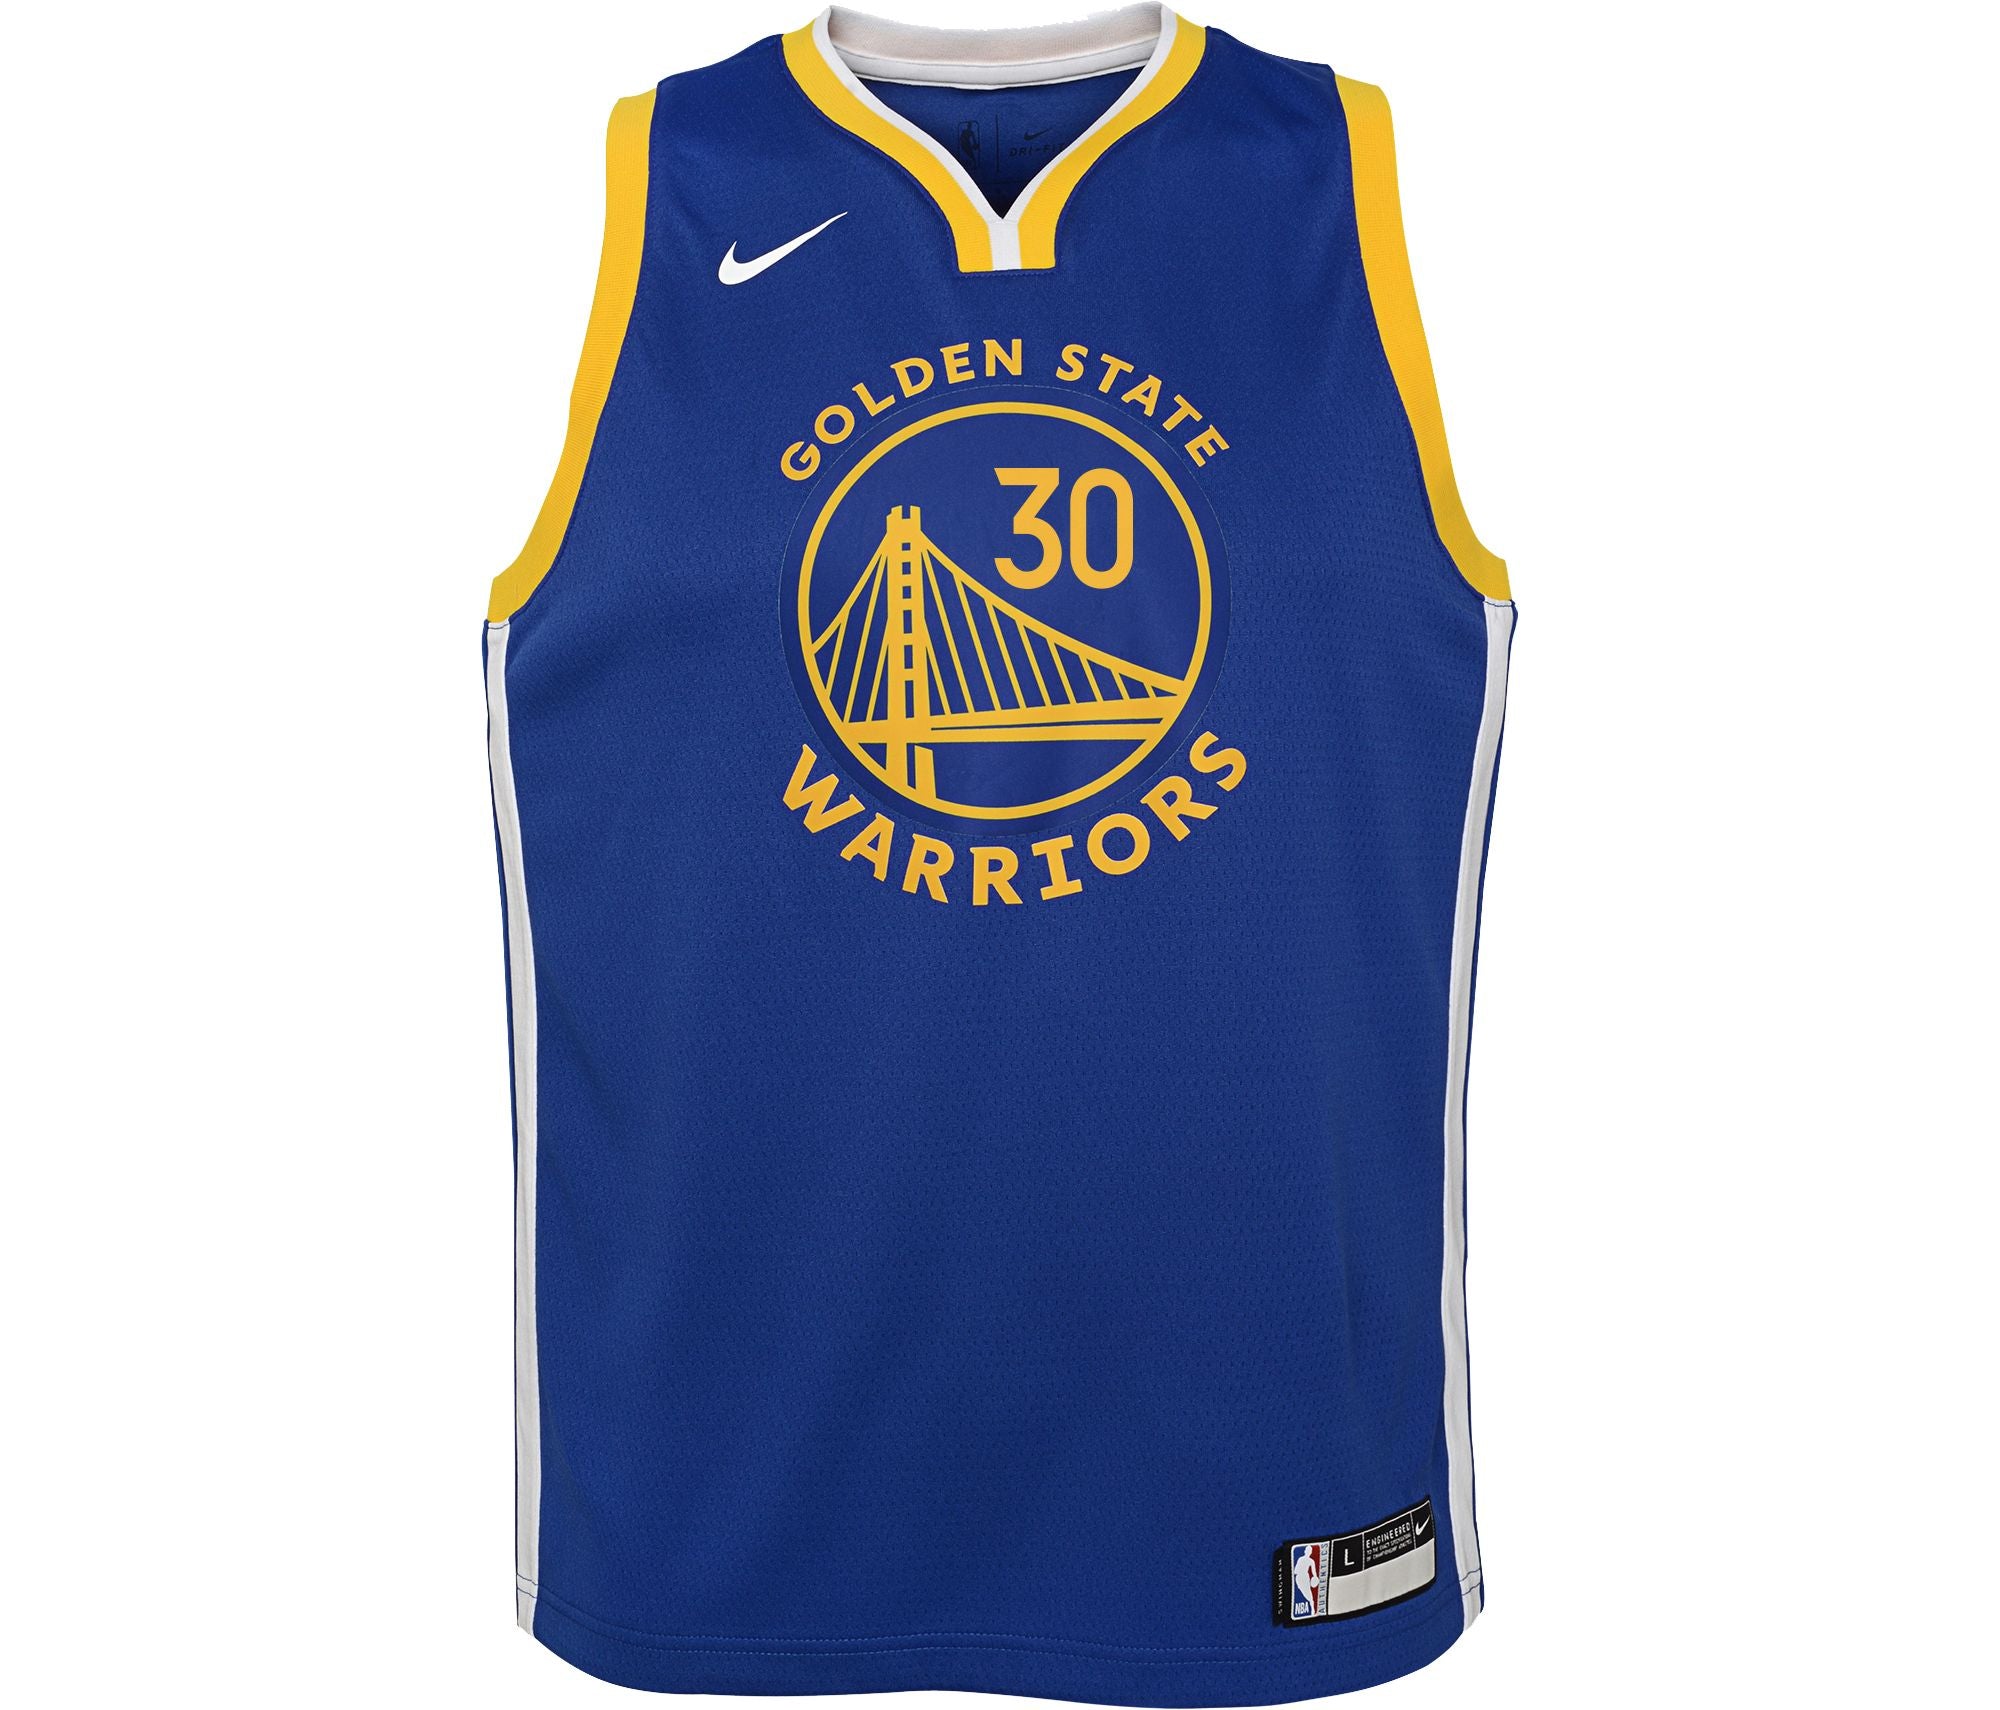  Stephen Curry Golden State Warriors Black #30 Youth 8-20  Alternate Edition Swingman Player Jersey (18-20) : Sports & Outdoors